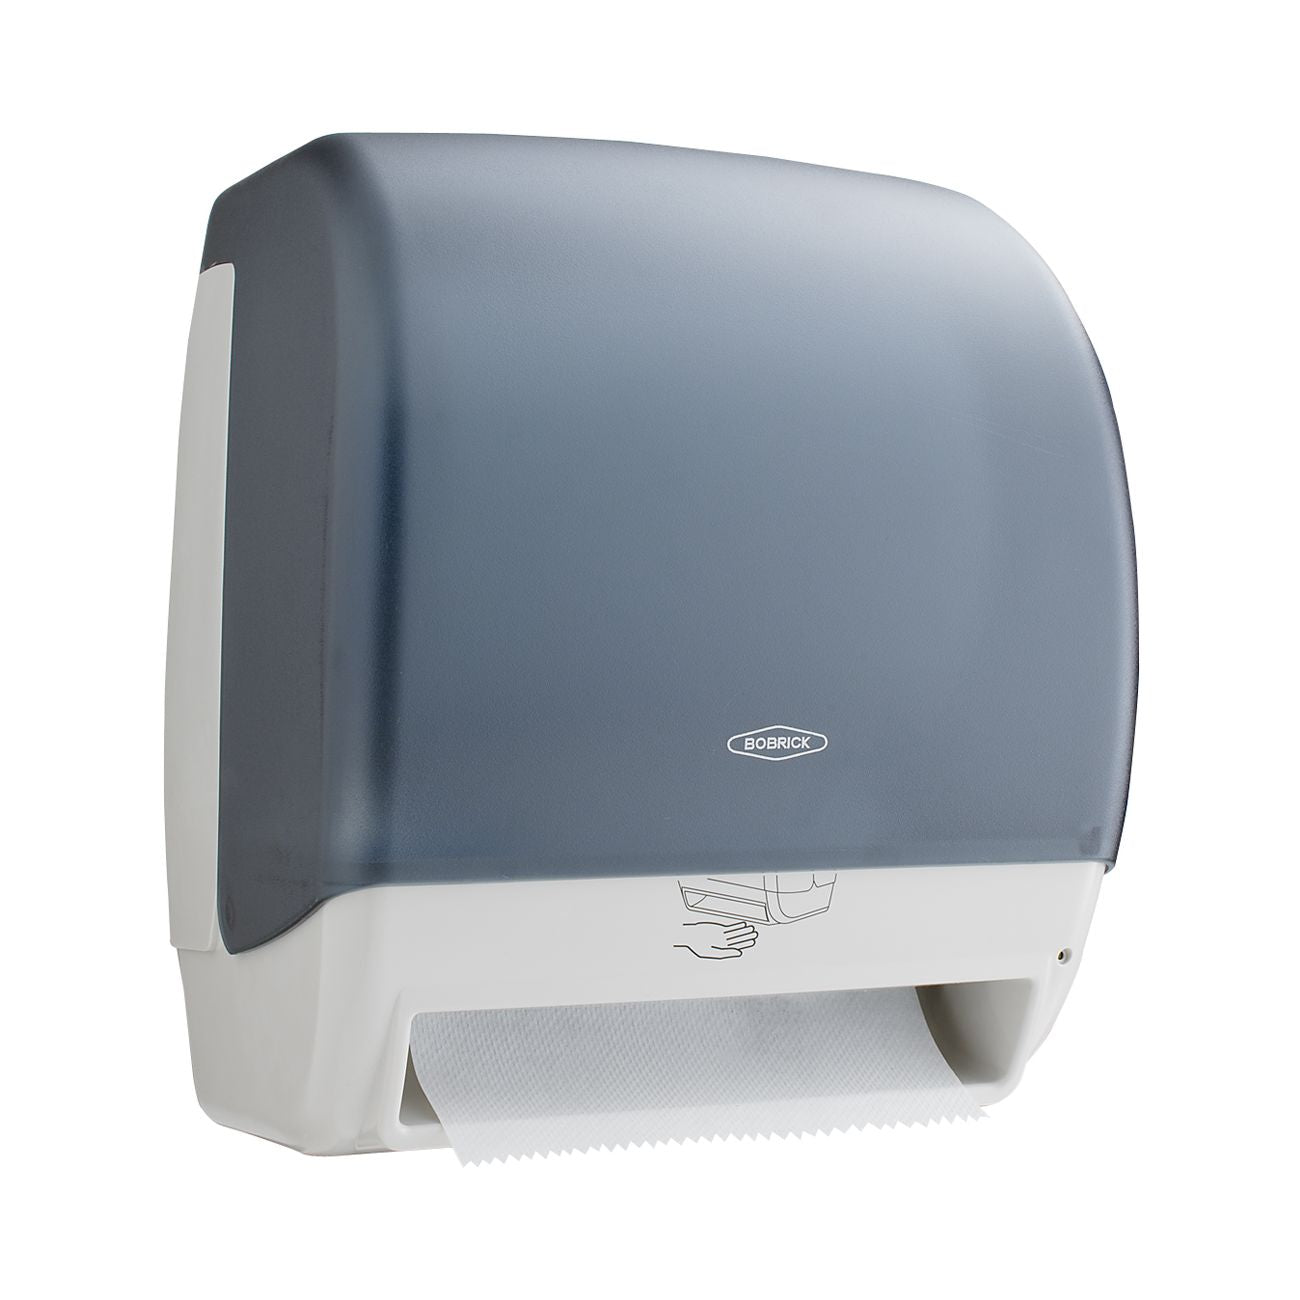 Bobrick 72974 - Automatic Roll Towel Dispenser in Gray Translucent